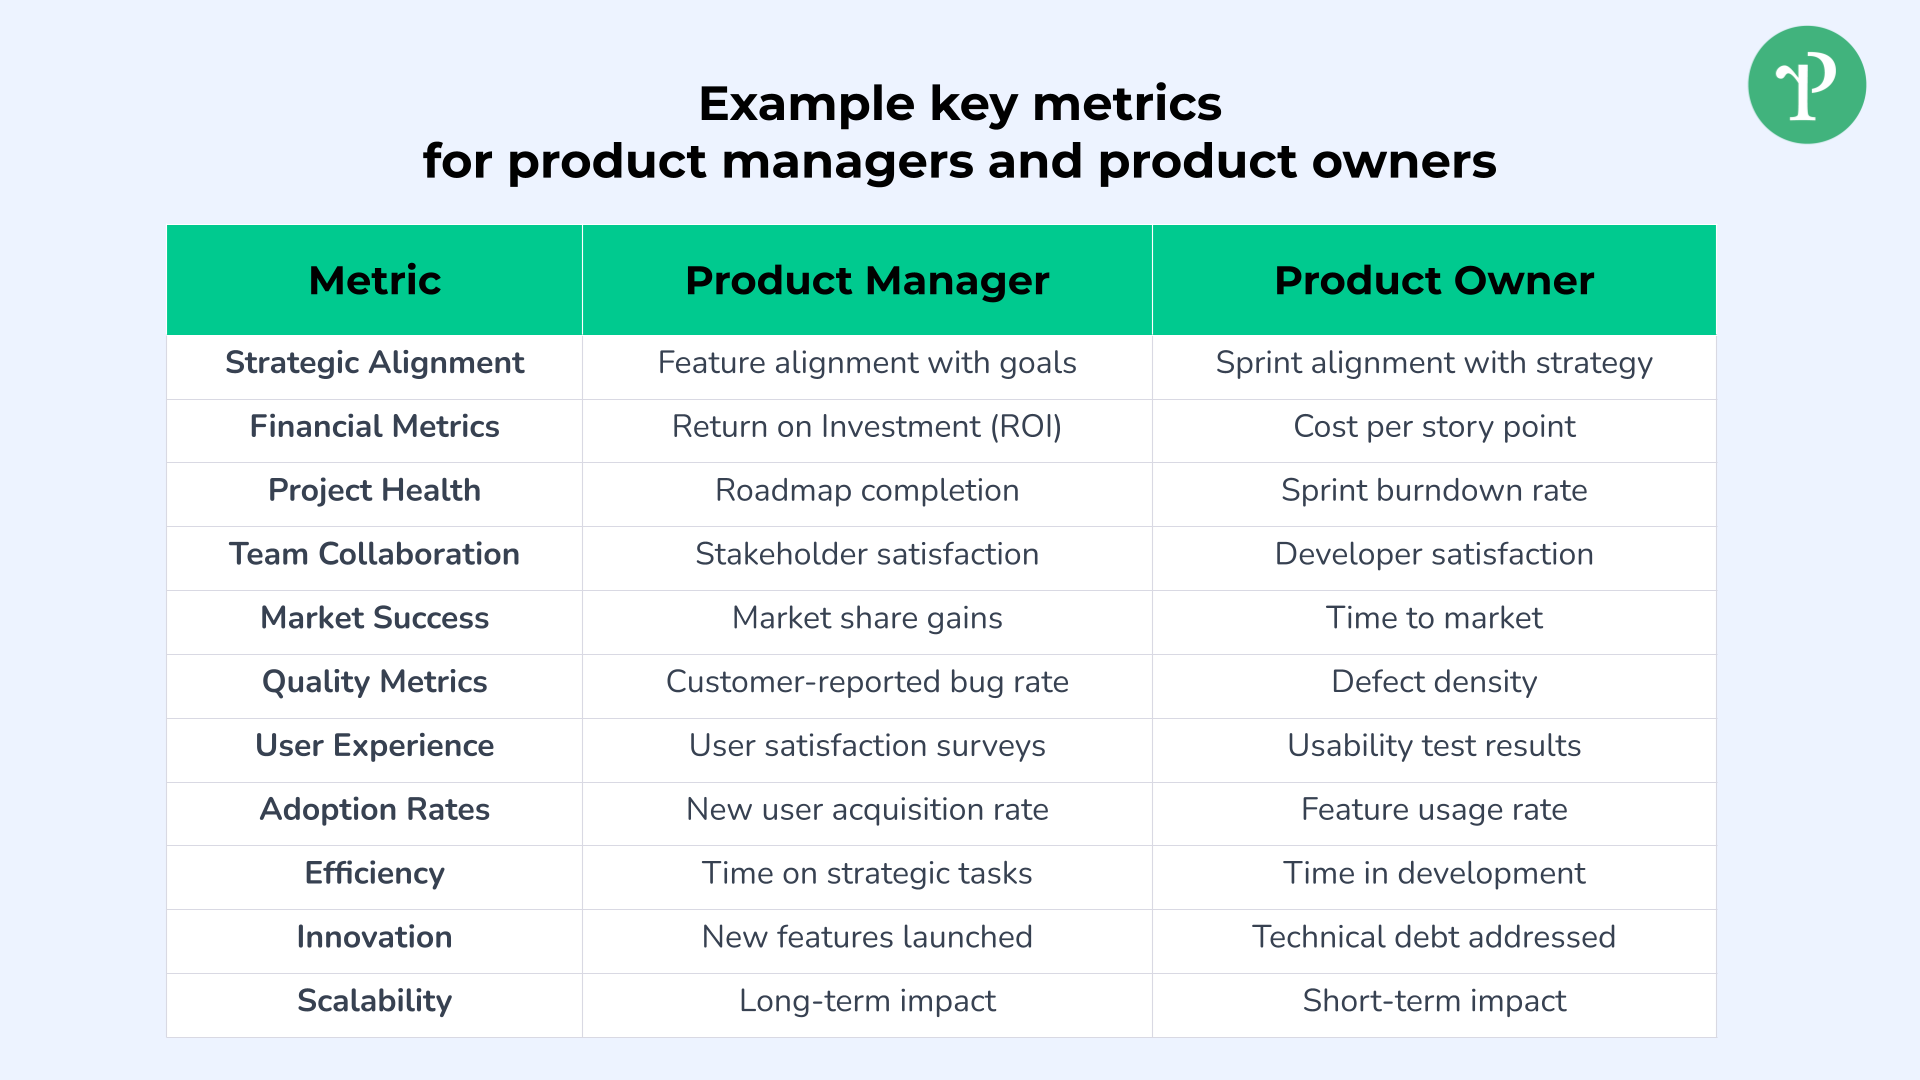 Esempi di metriche chiave per i product manager e i product owner